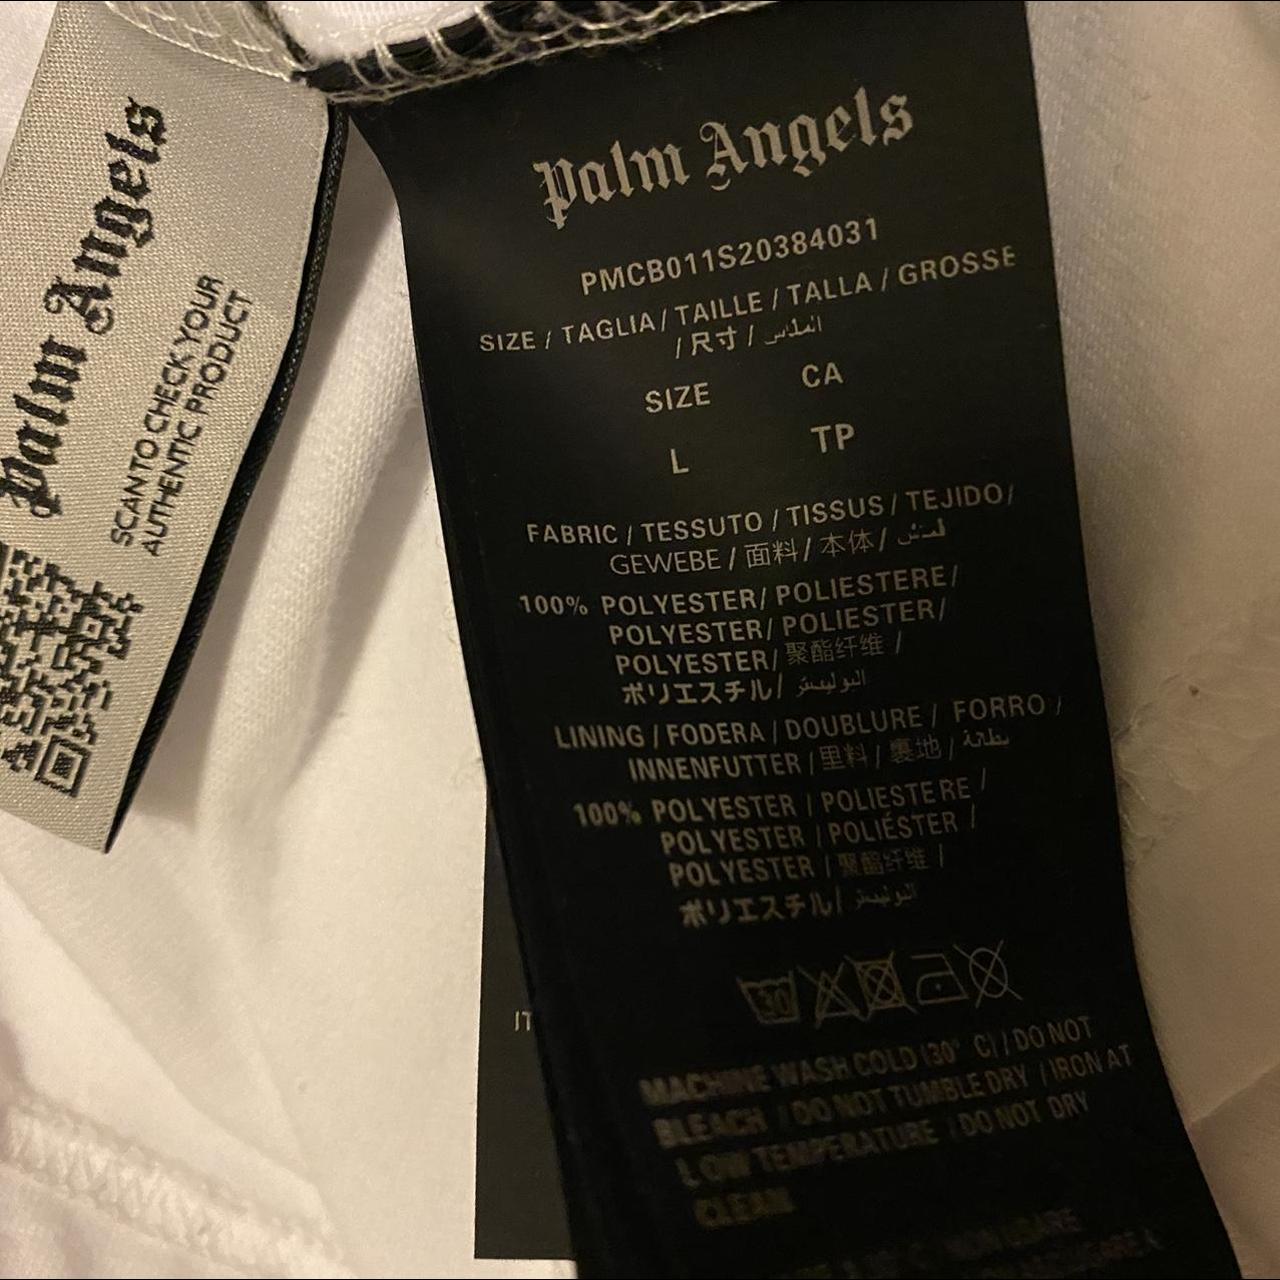 Gunna and Palm Angels Release Just for P'Z Tee